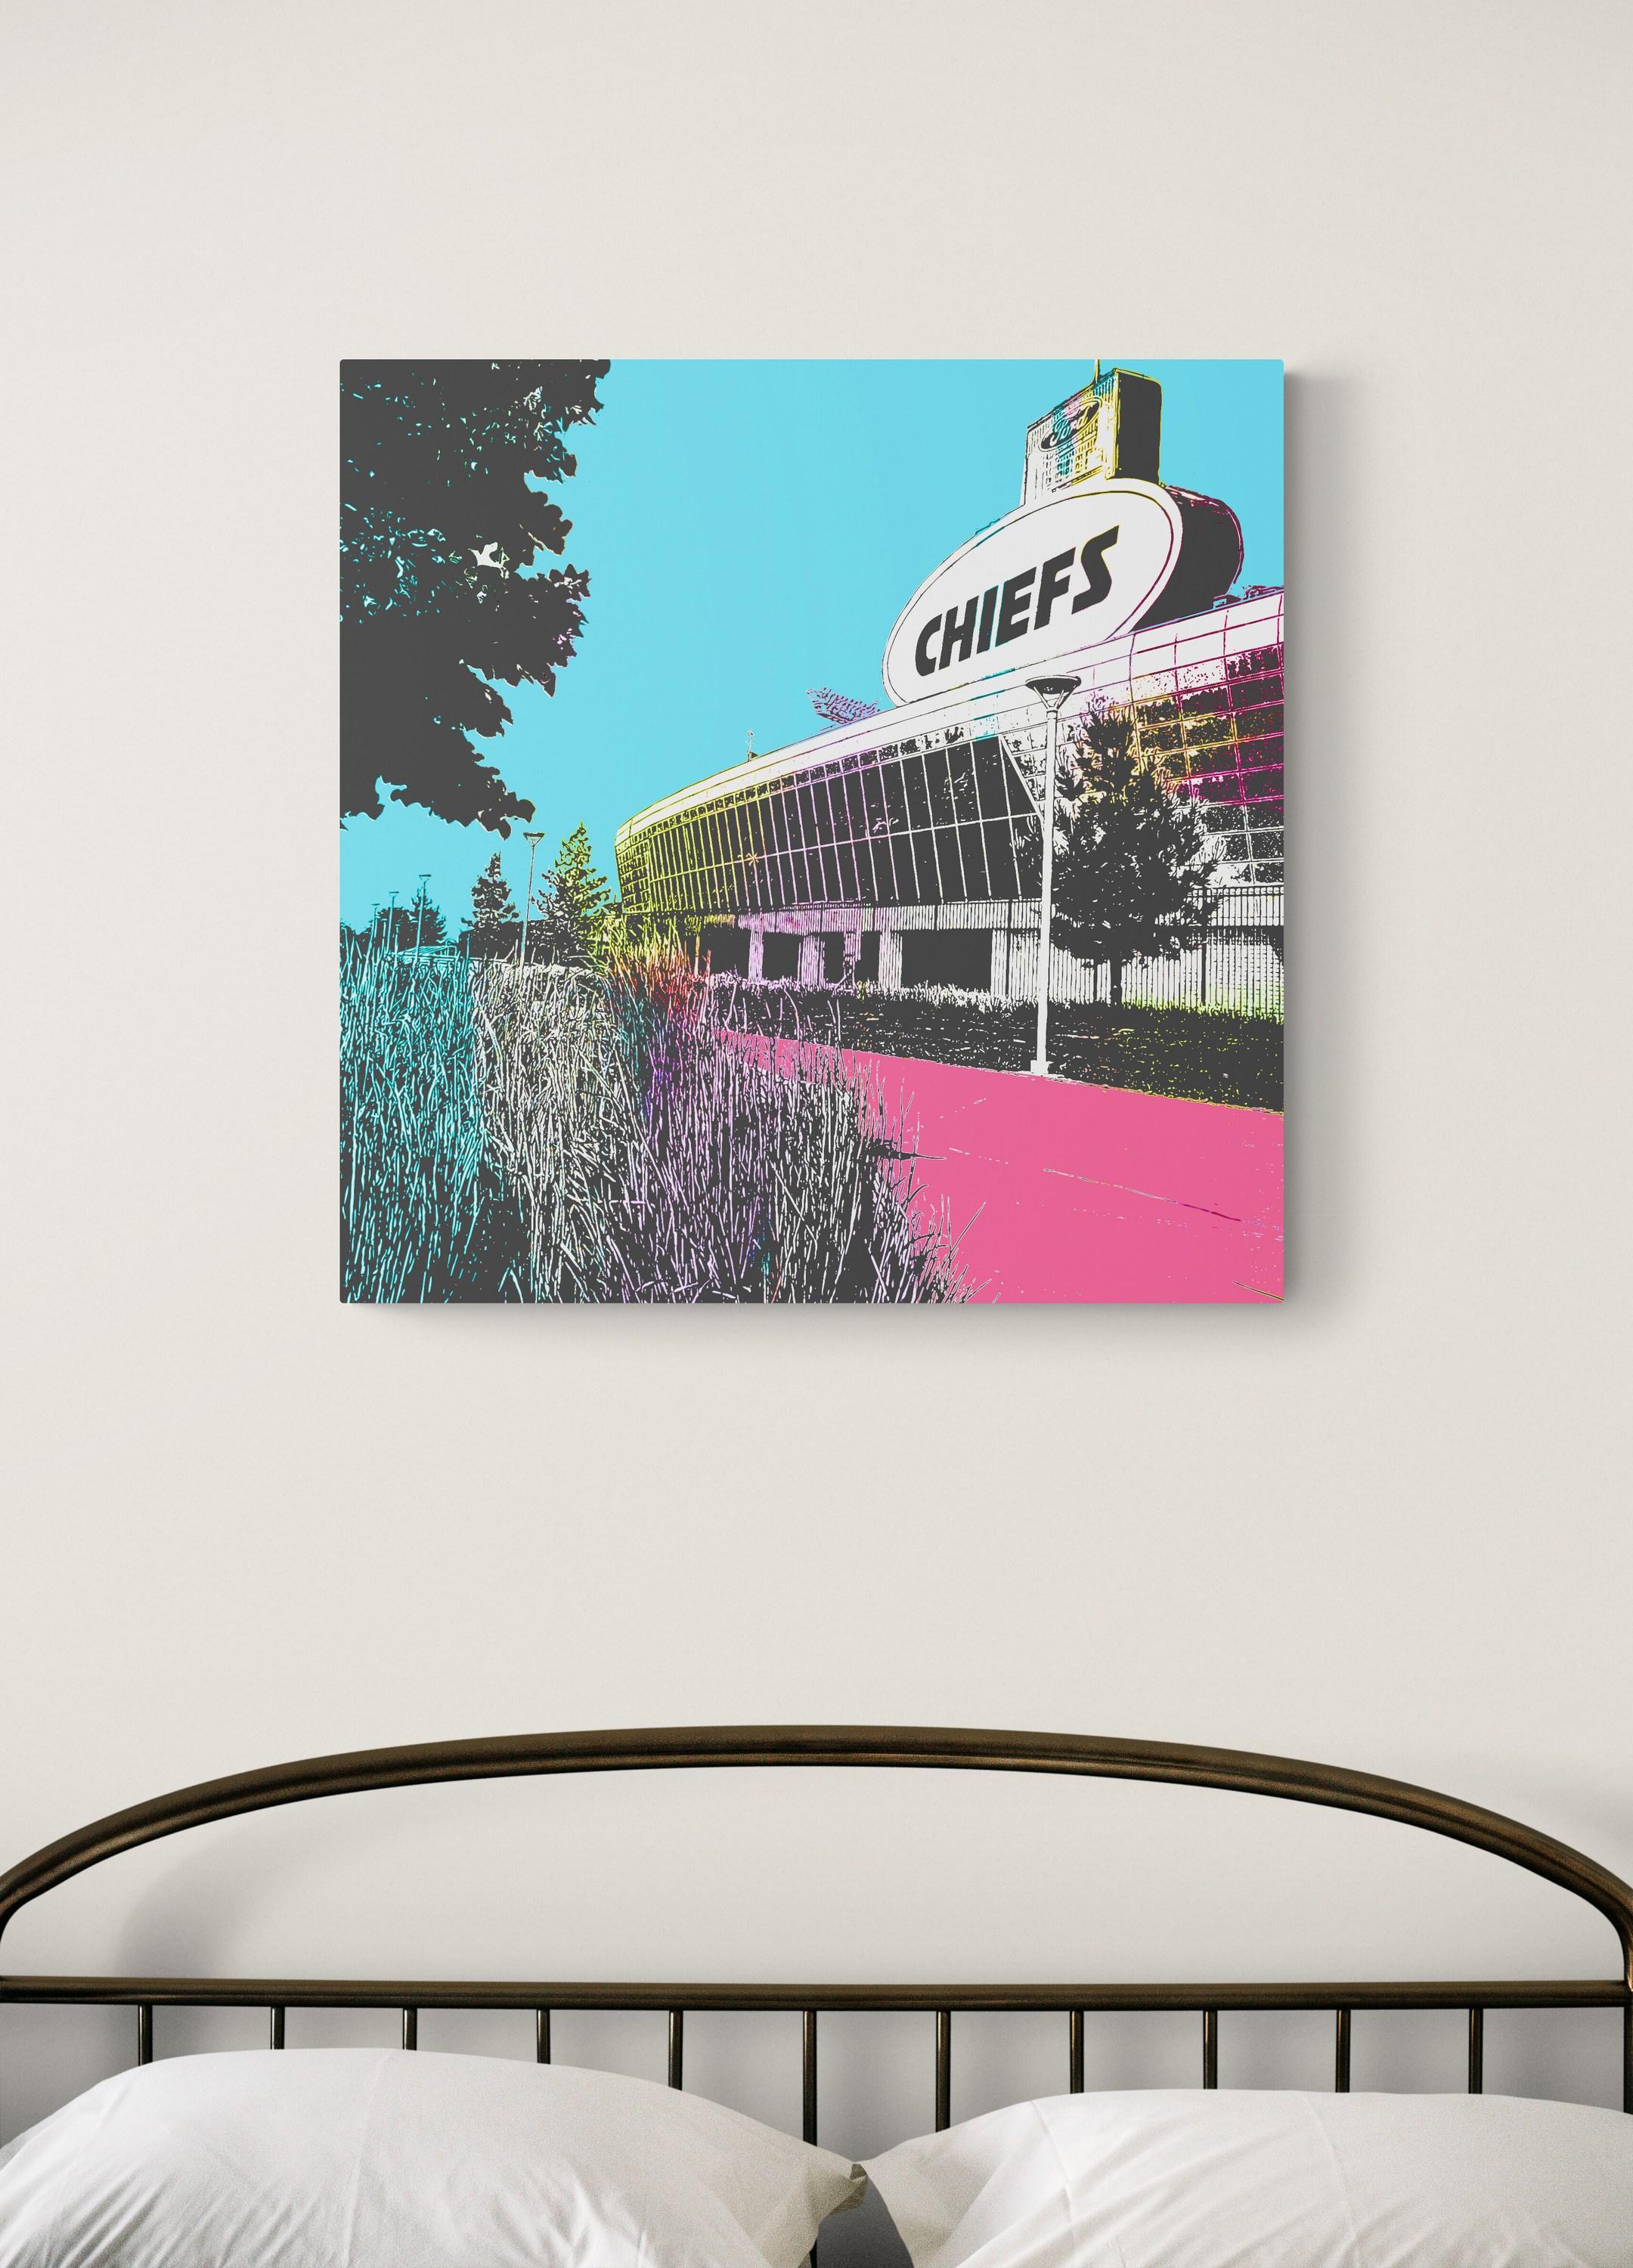 Outstanding In Their Field (Iconic, Street Art, Vibrant, Graffiti, Metal Print) For Sale 3